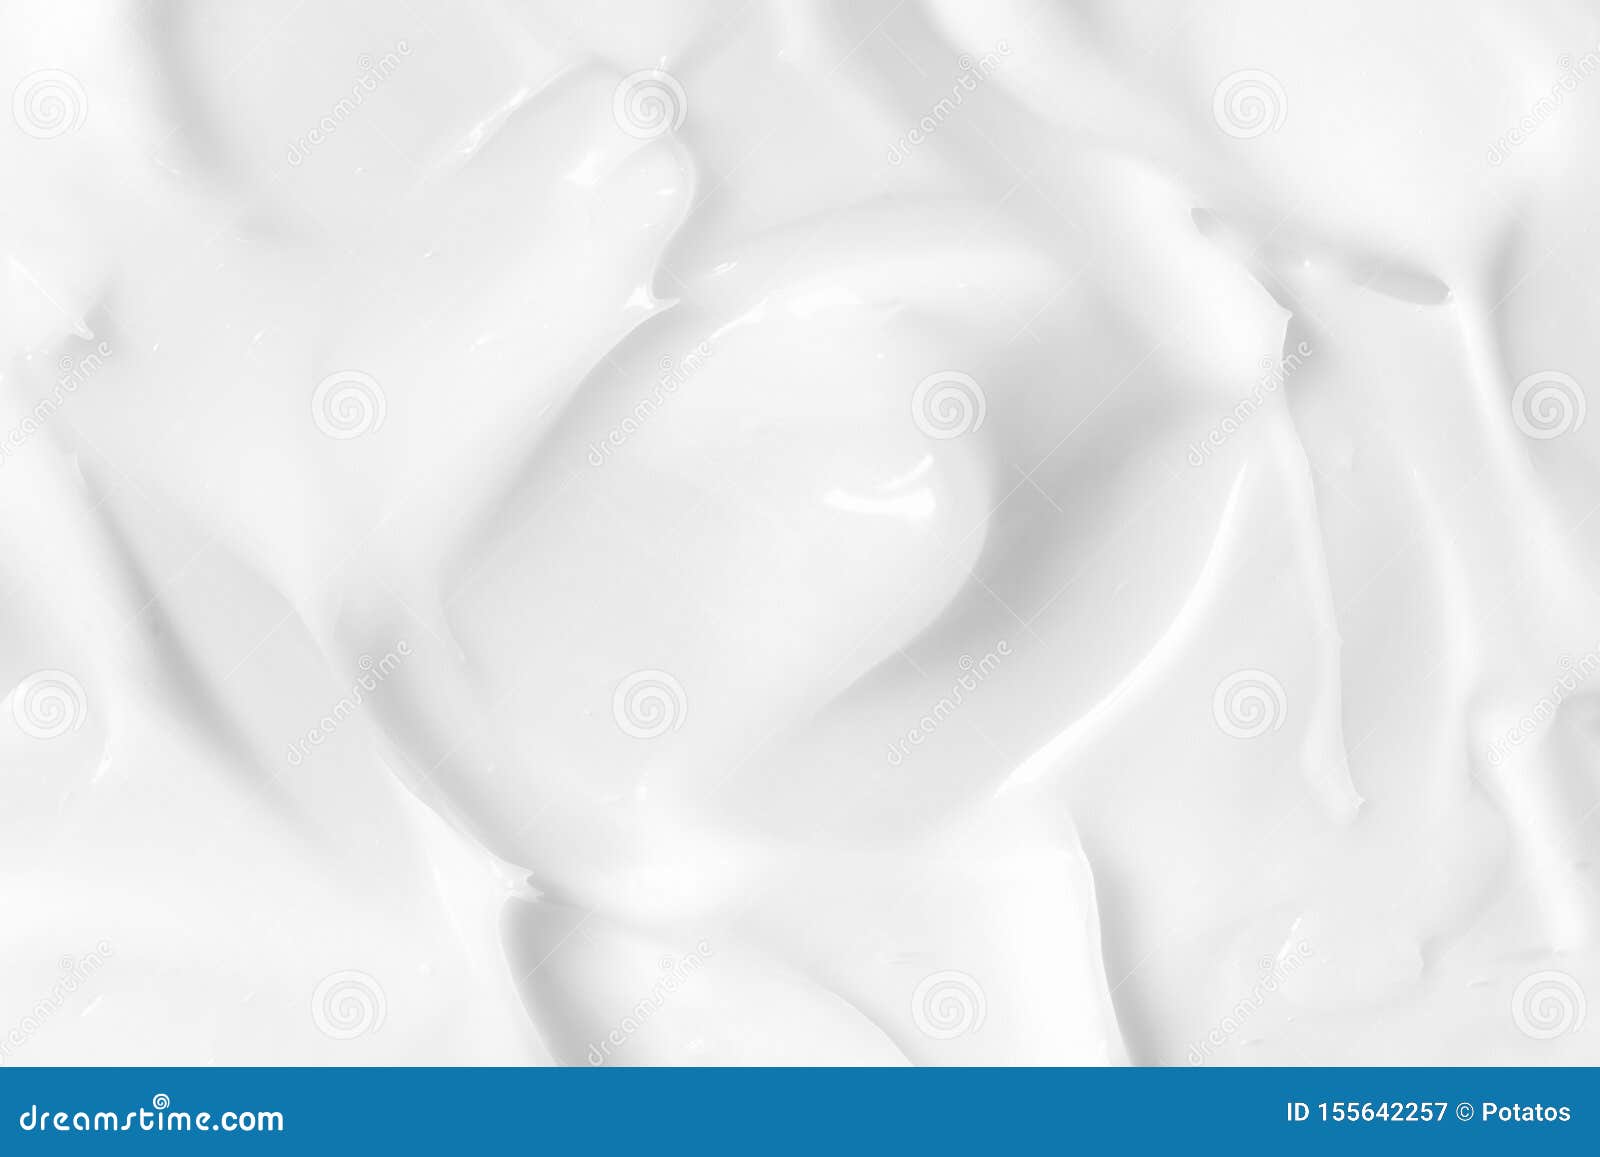 lotion texture. white skin care cream background. cosmetic creamy smudge